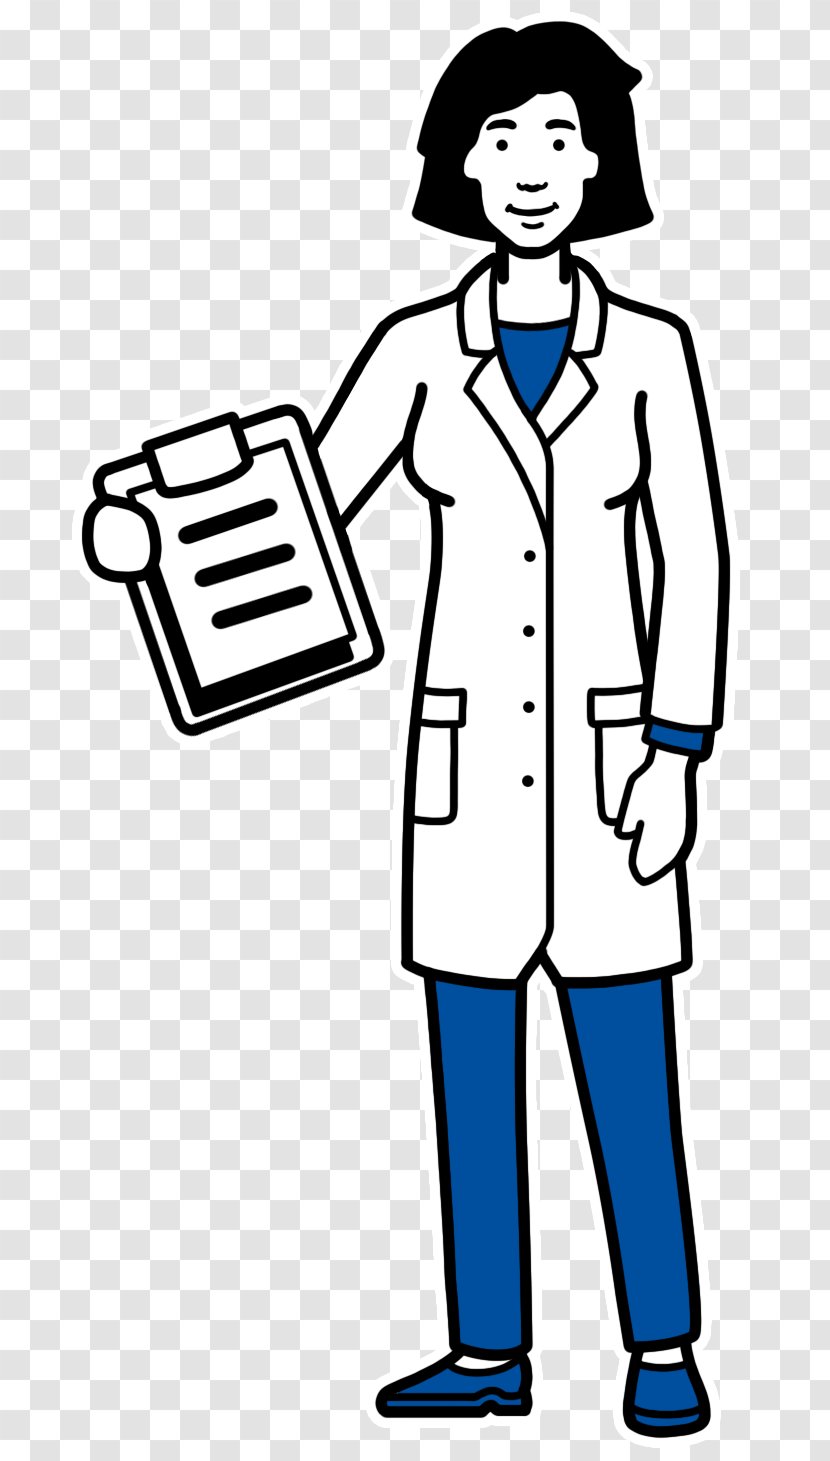 General Practitioner Physician Patient Itsourtree.com Clip Art - Cartoon - Hausa Transparent PNG